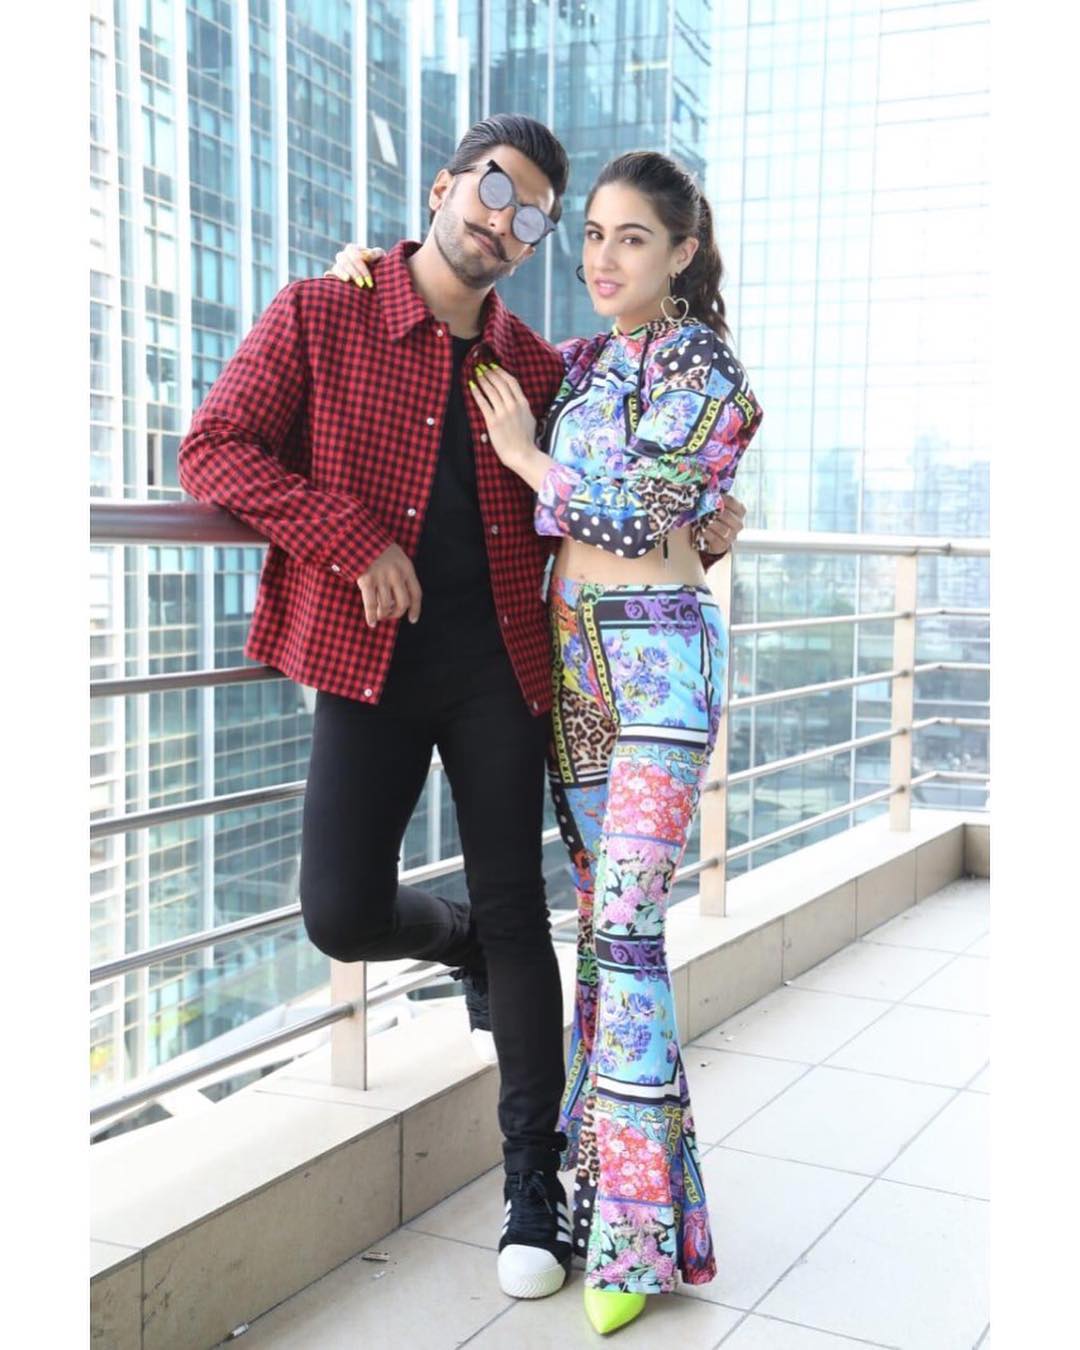 Ranveer Singh and Sara Ali Khan make one of the most enthusiastic duos in the industry.